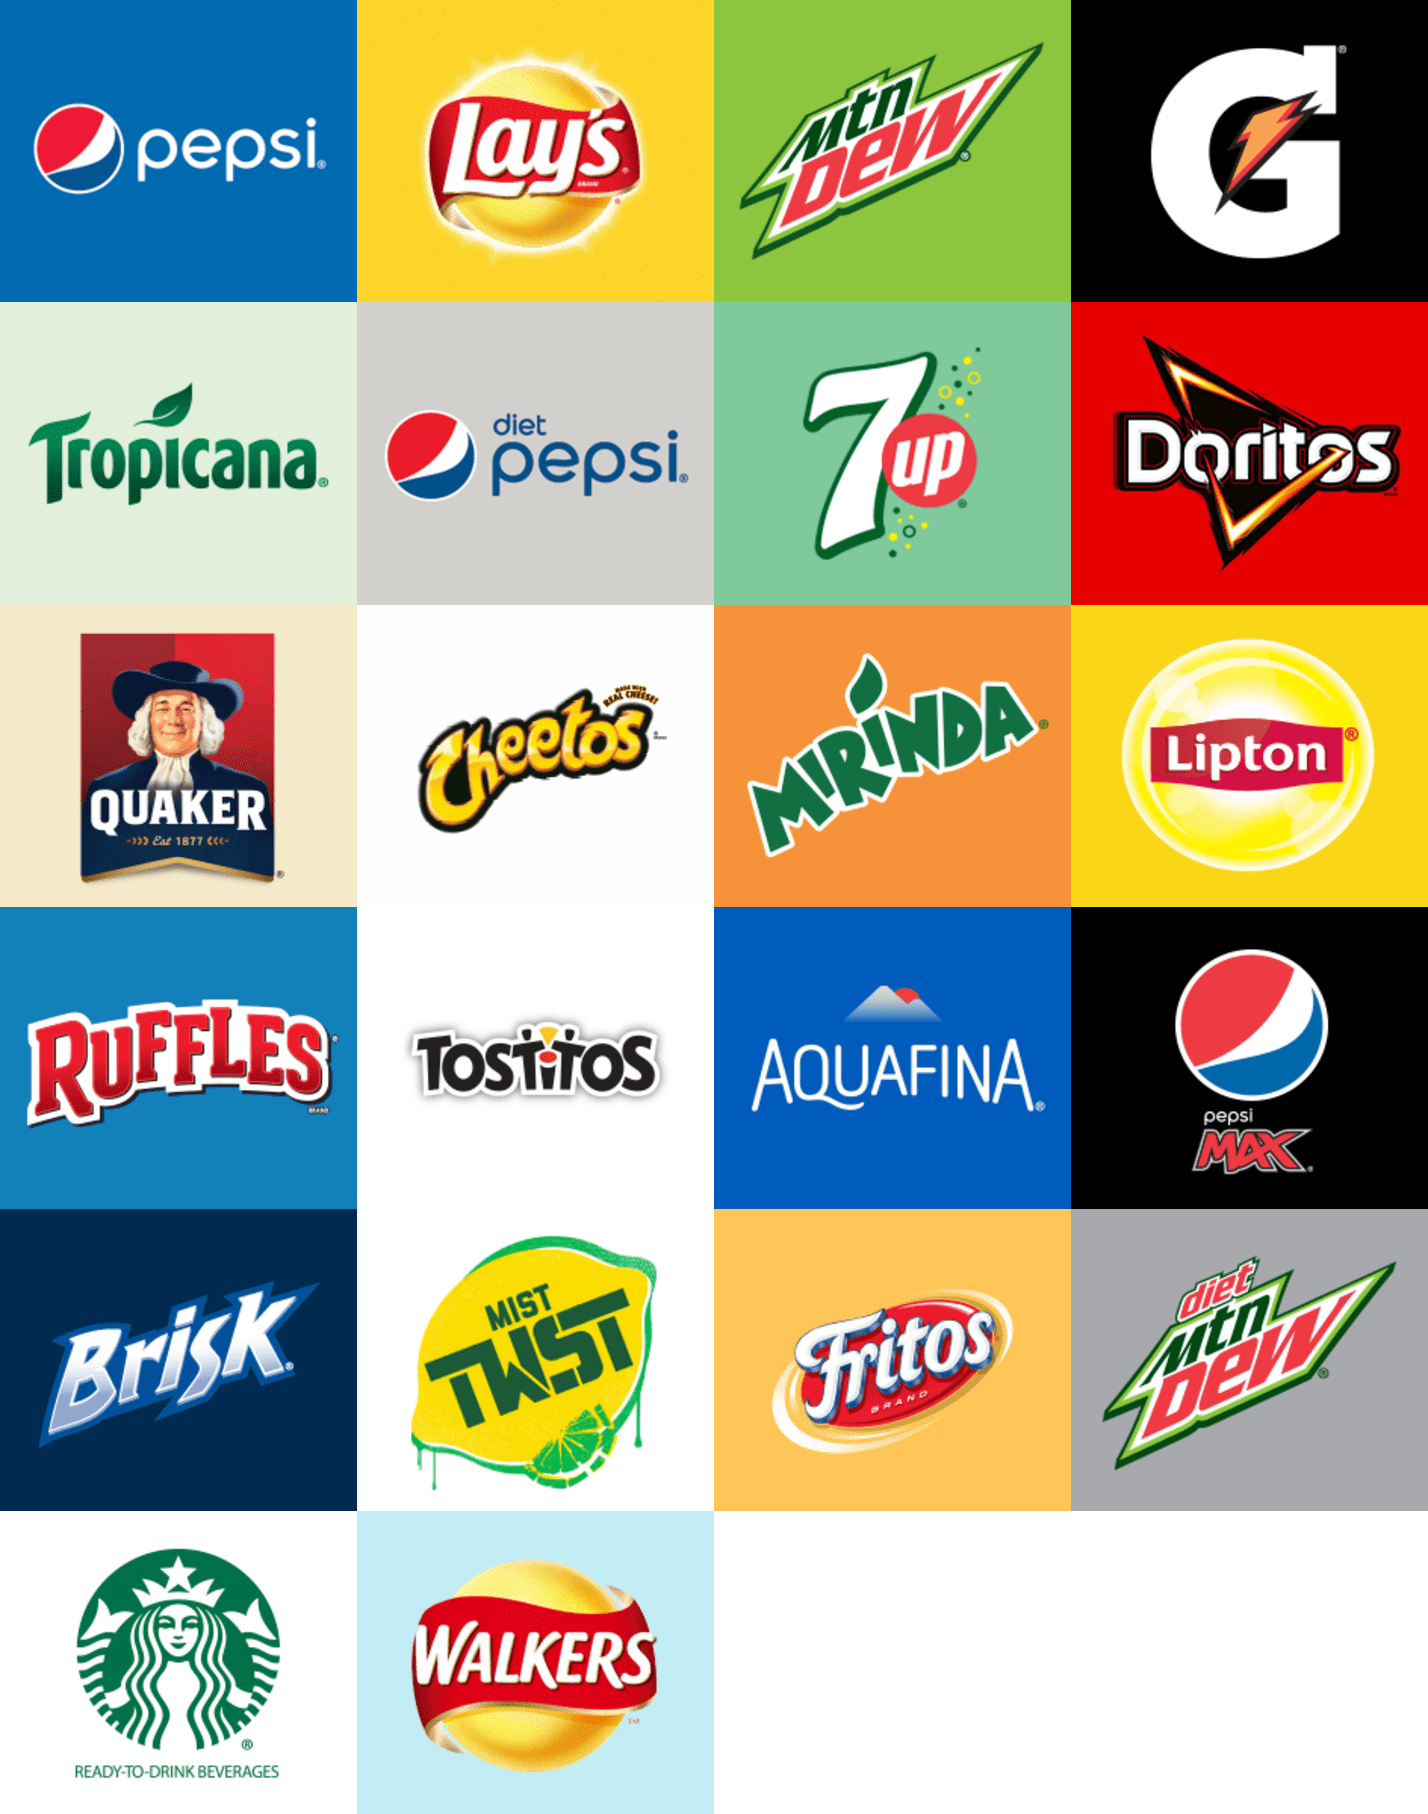 Pepsi Product Logo - PepsiCo SWOT Analysis (5 Key Strengths in 2019) - SM Insight